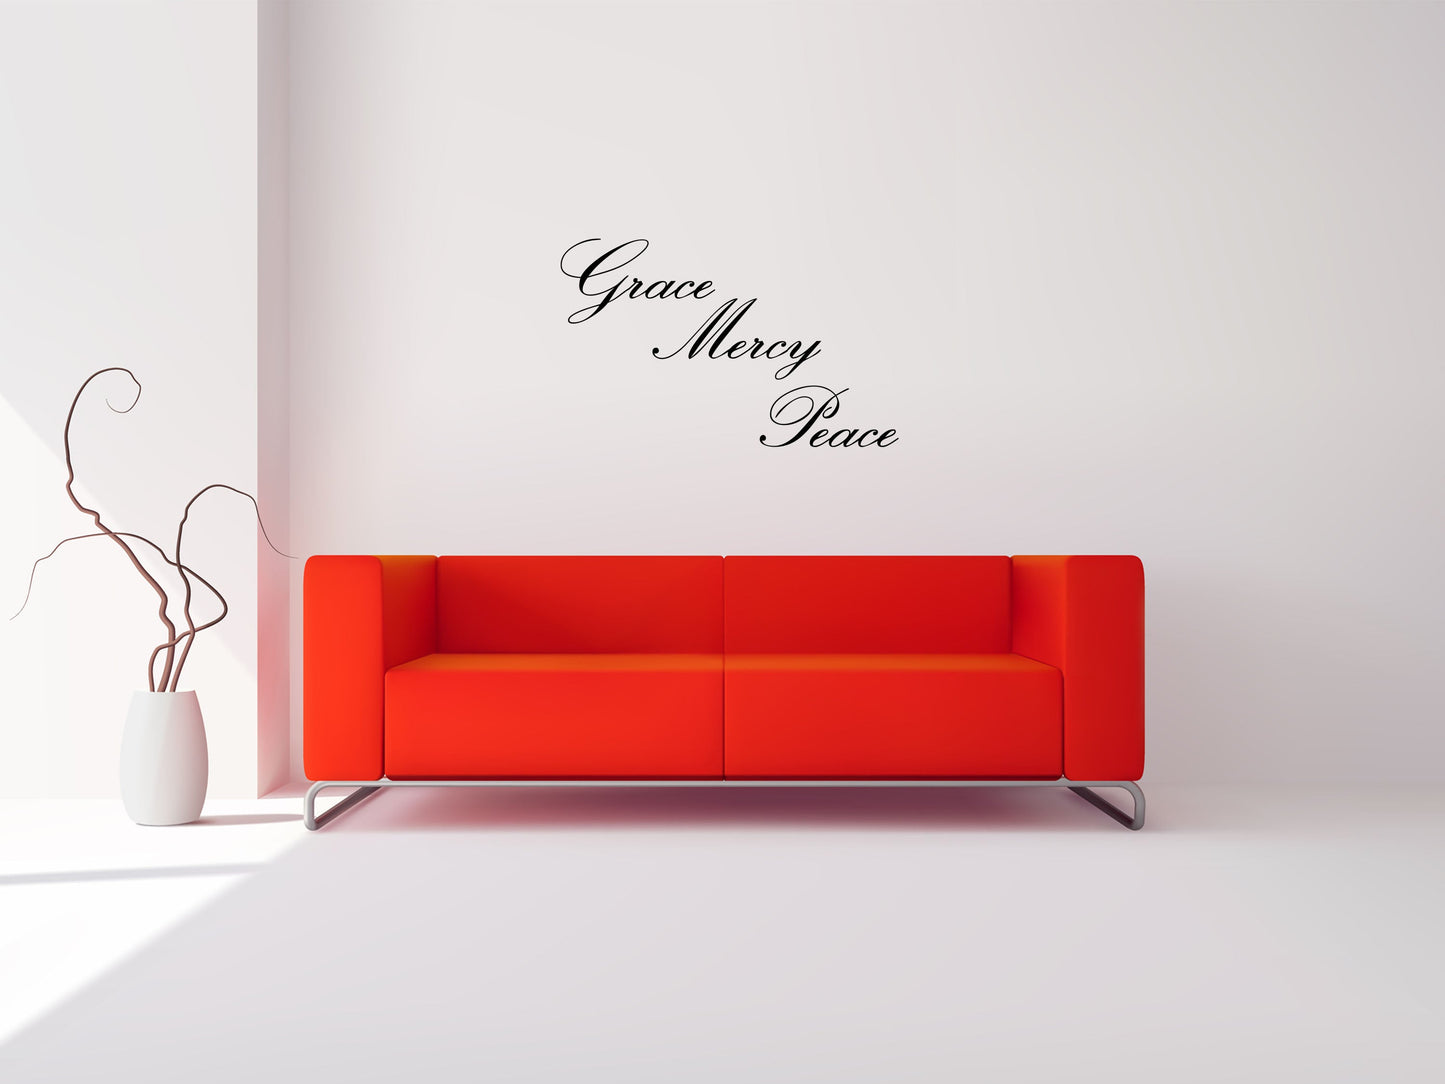 Grace Mercy Peace - Religious Wall Decal - Christian Art - Home Décor - Scripture Wall Art Sign Vinyl Wall Decal Inspirational Wall Signs 